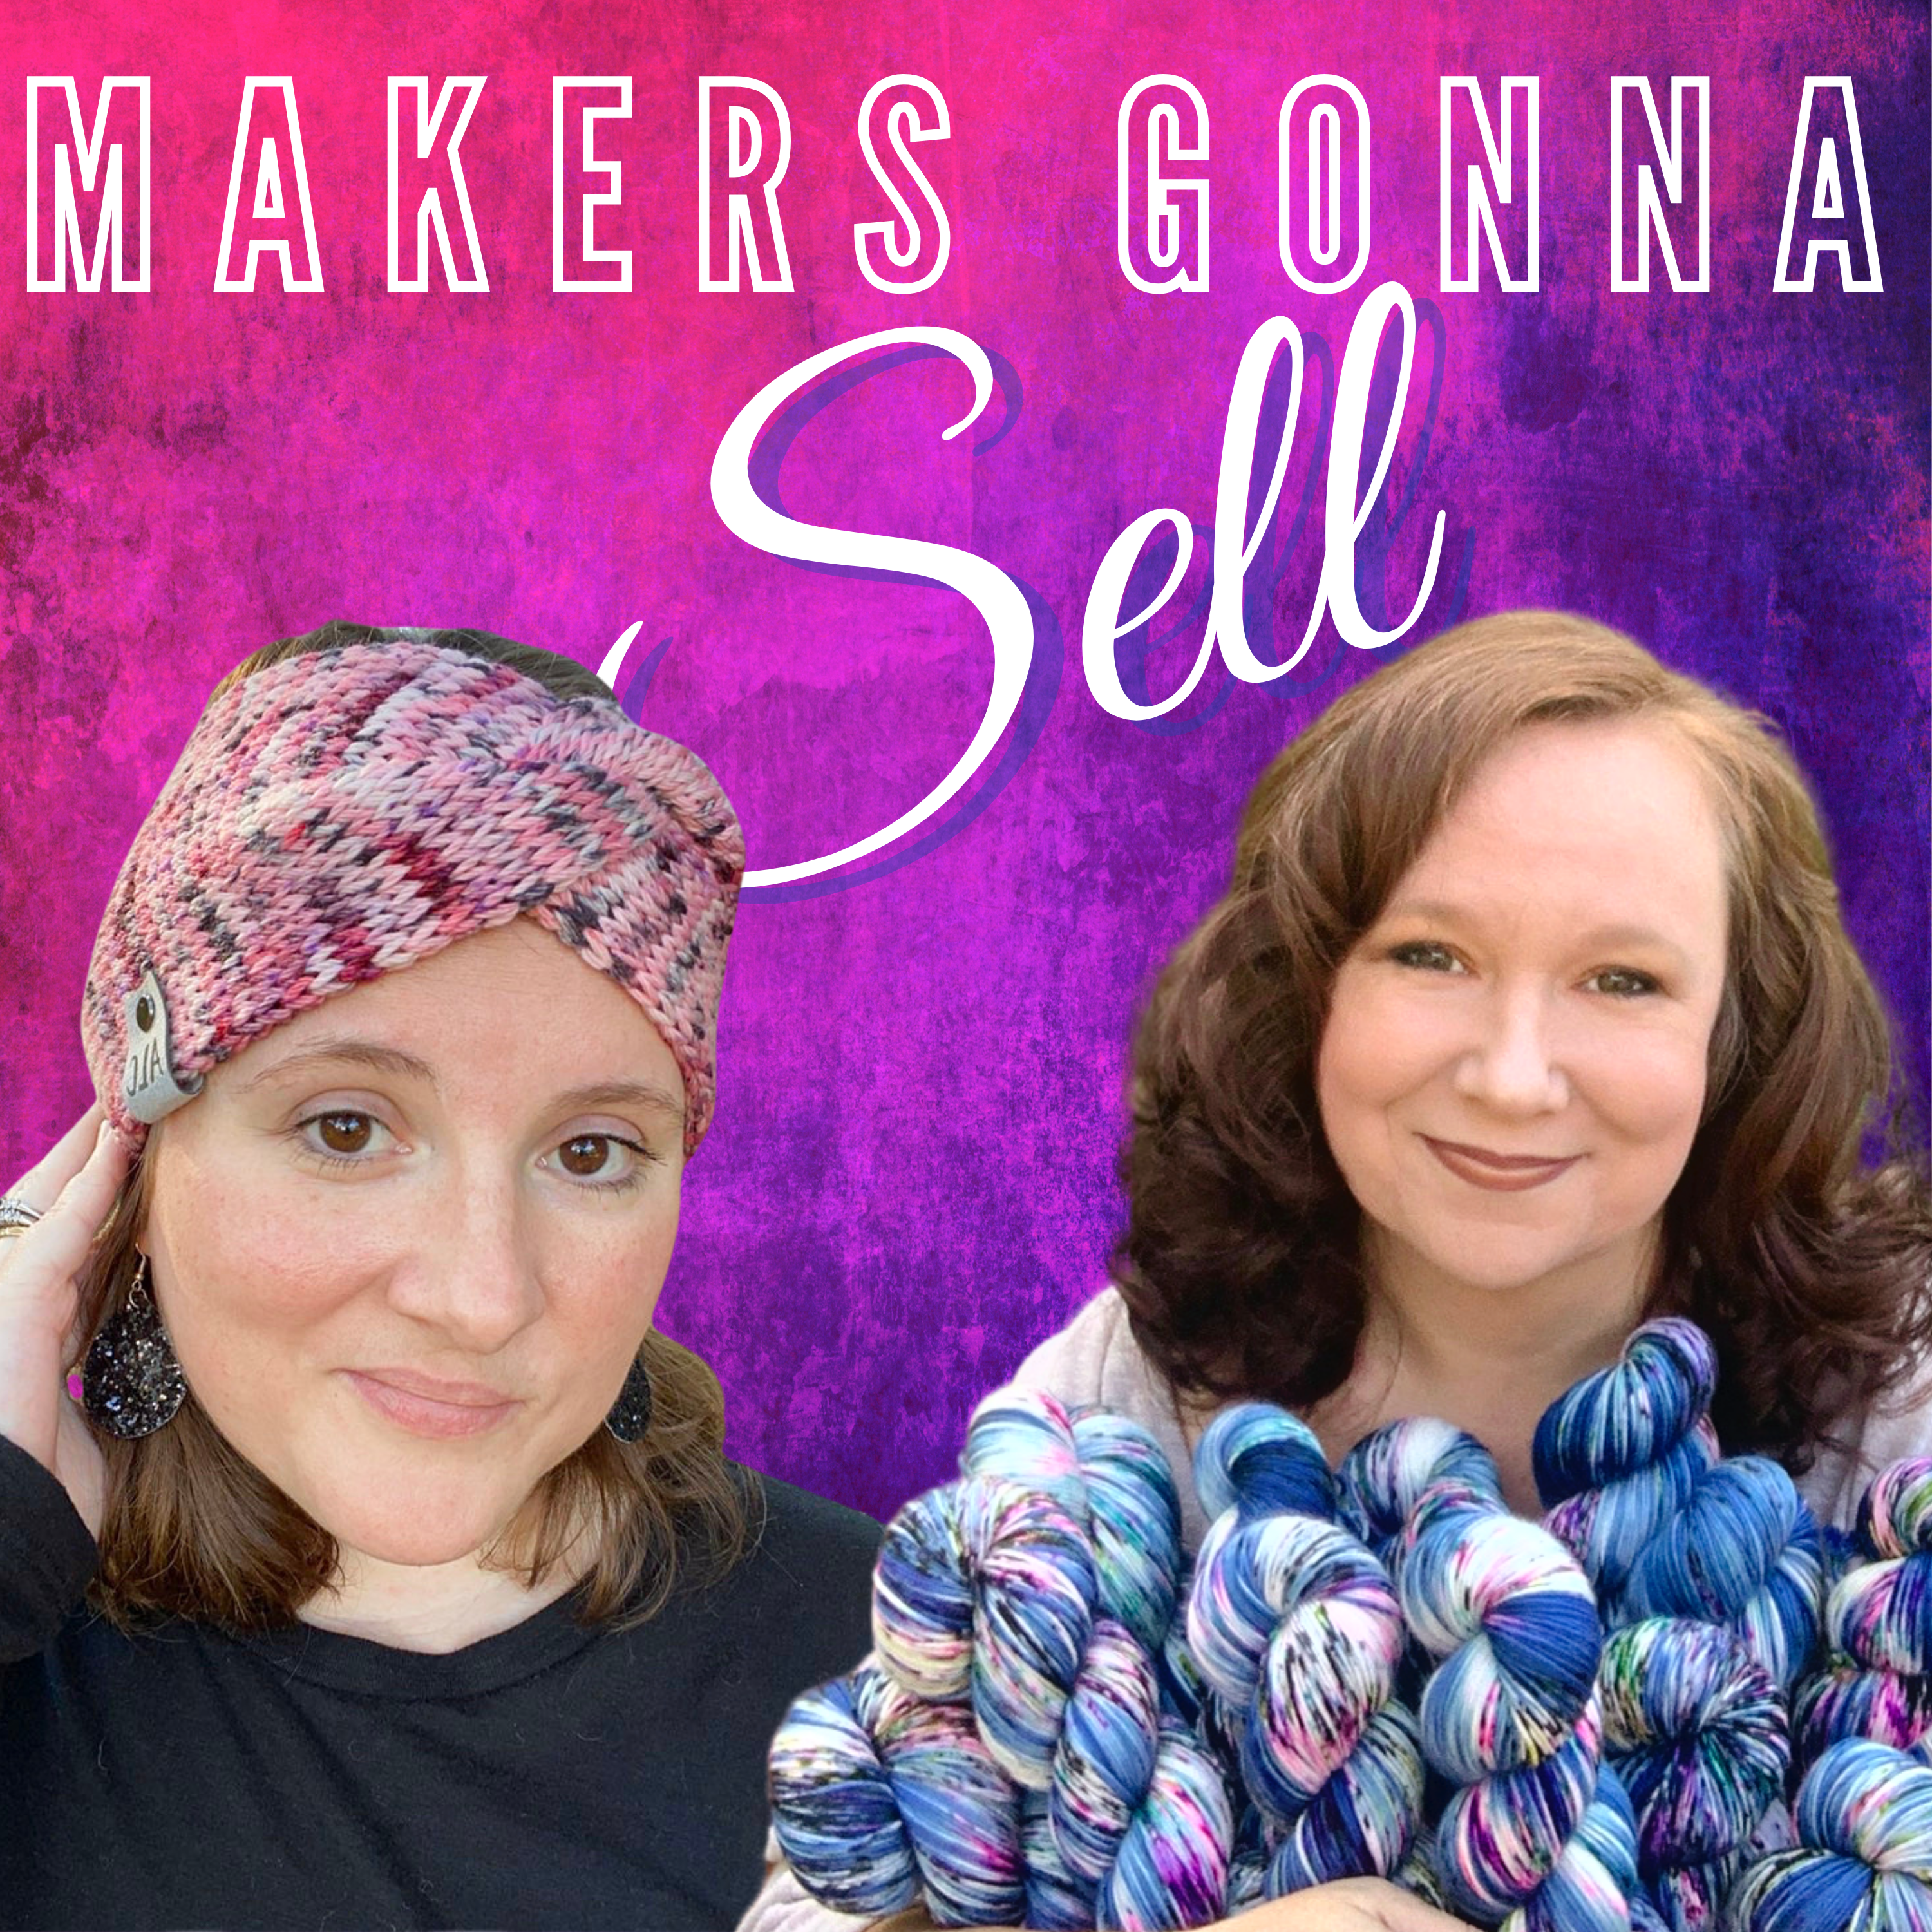 Makers Gonna Sell Podcast: Episode 06 - A Behind The Scenes Look At Our Workflows